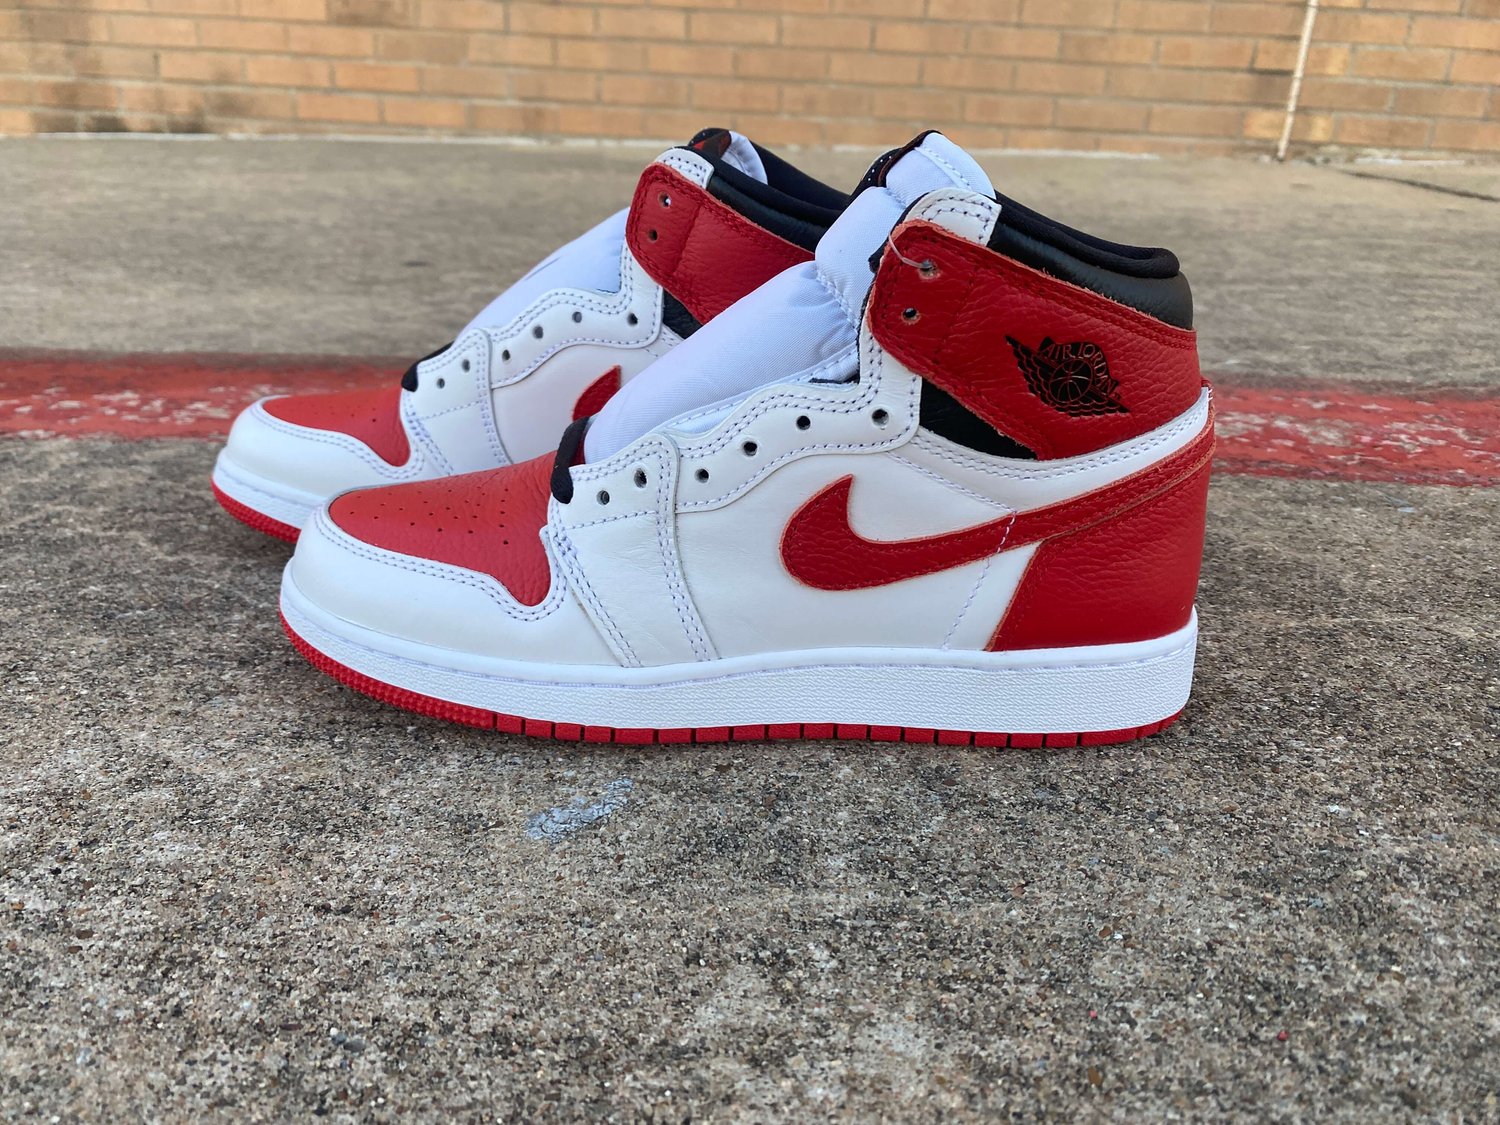 staining Engage formula Quick Review: 2022 Air Jordan 1 “Heritage” | The Retro Insider